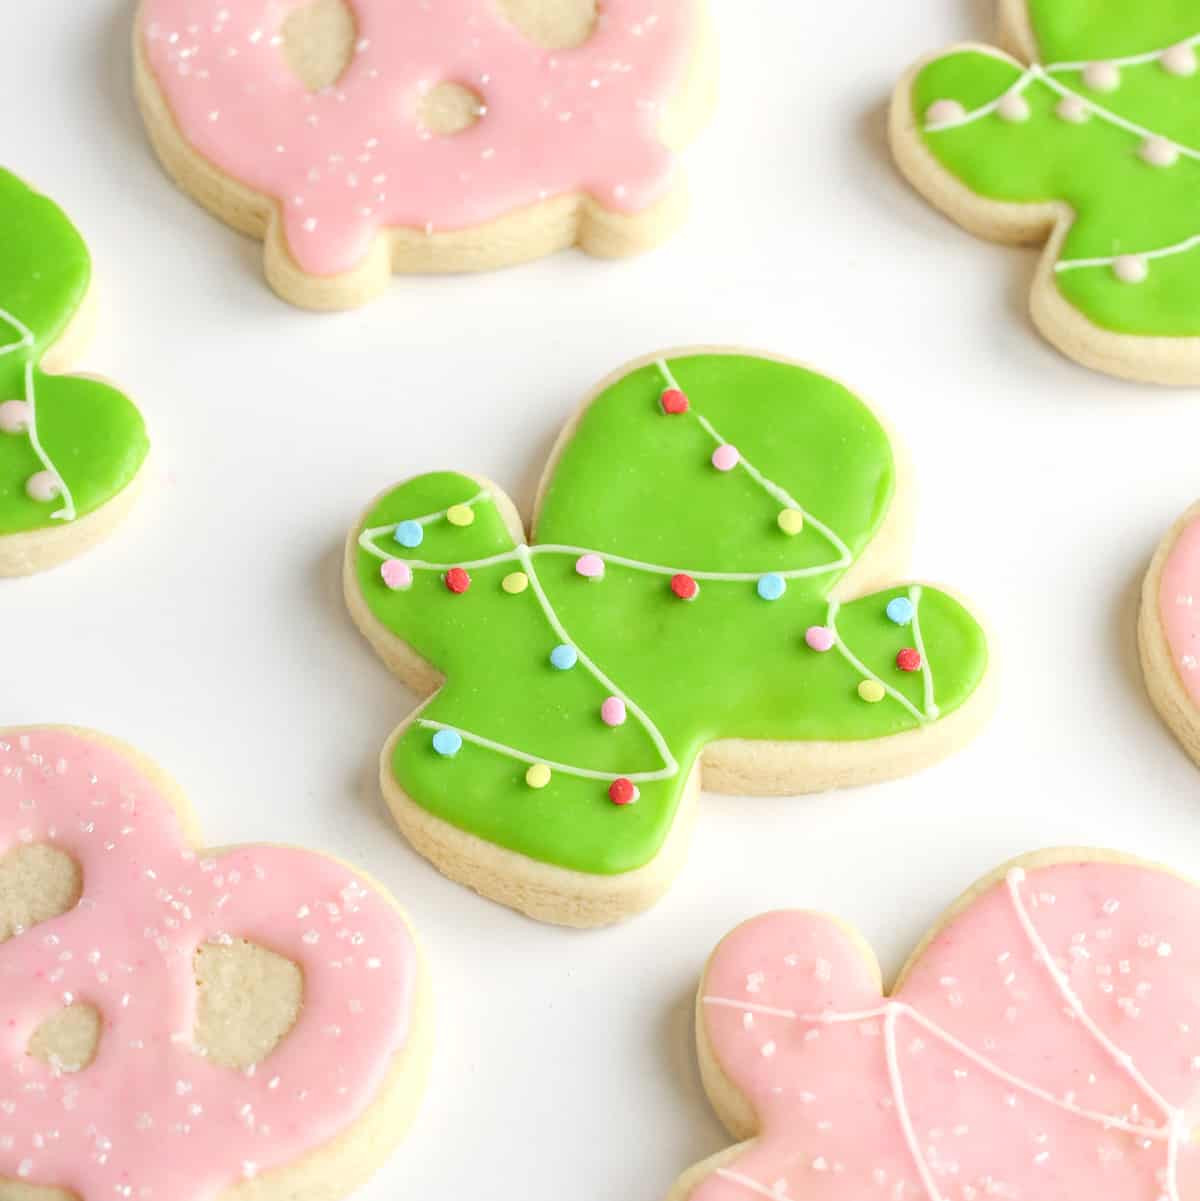 Icing For Sugar Cookies
 Easy Sugar Cookie Icing Recipe Without Eggs